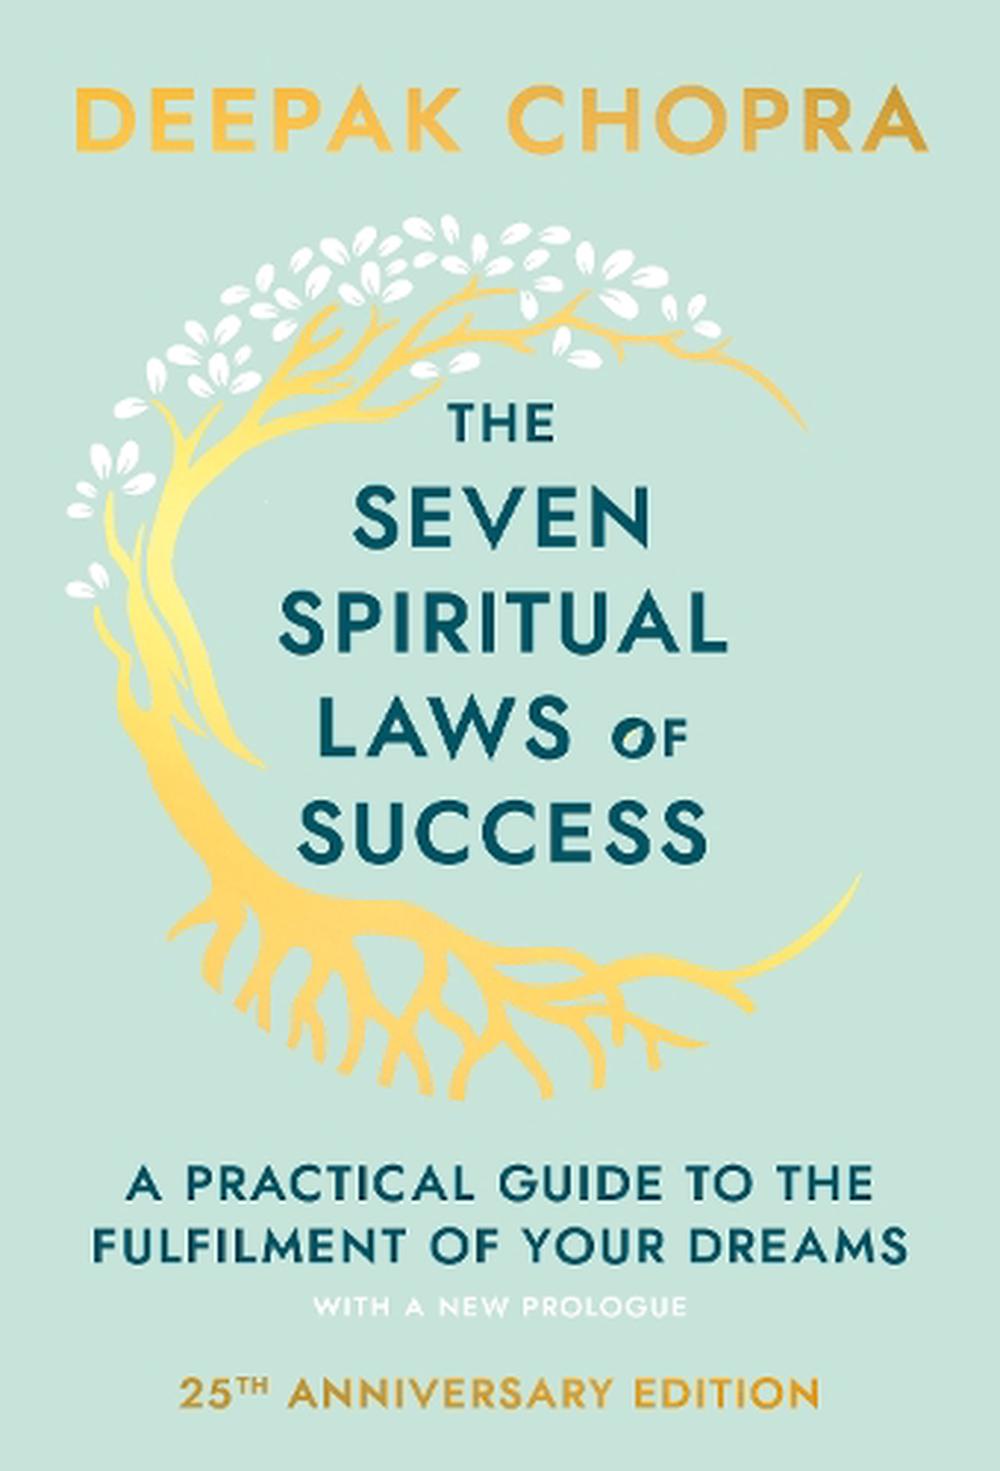 Seven　Chopra,　The　Deepak　9780593040836　Spiritual　Laws　Of　Hardcover,　Success　Nile　by　Dr　Buy　online　at　The